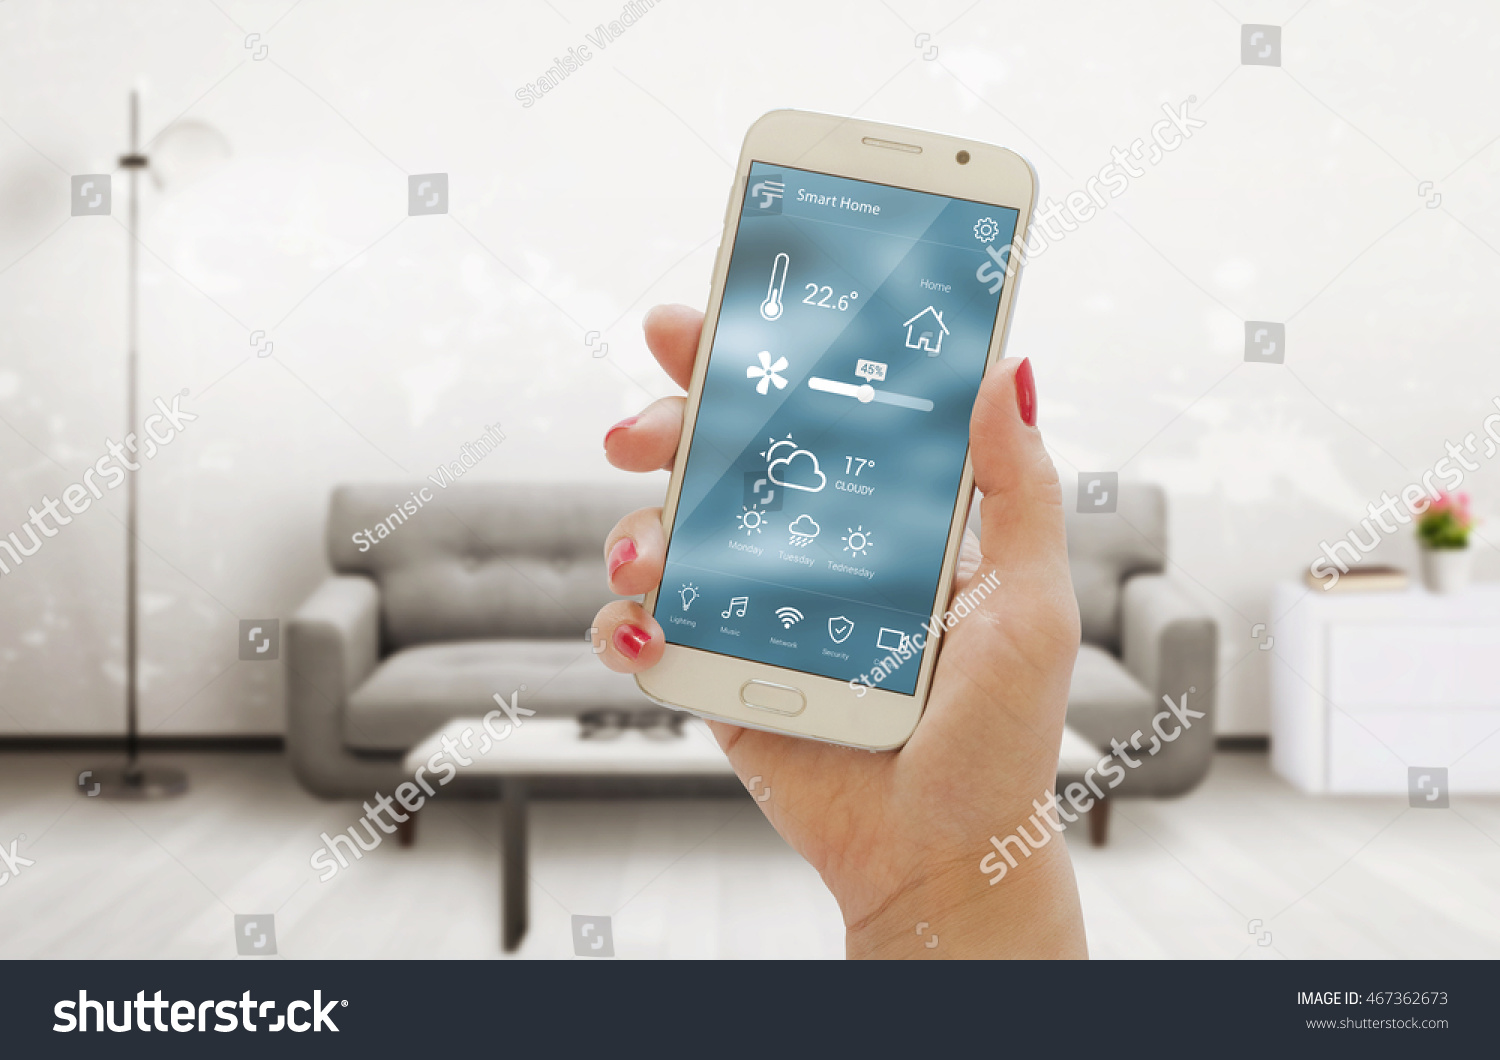 Home temperature, safety and environment control on mobile app. Smart phone in woman hand. Living room in background. #467362673